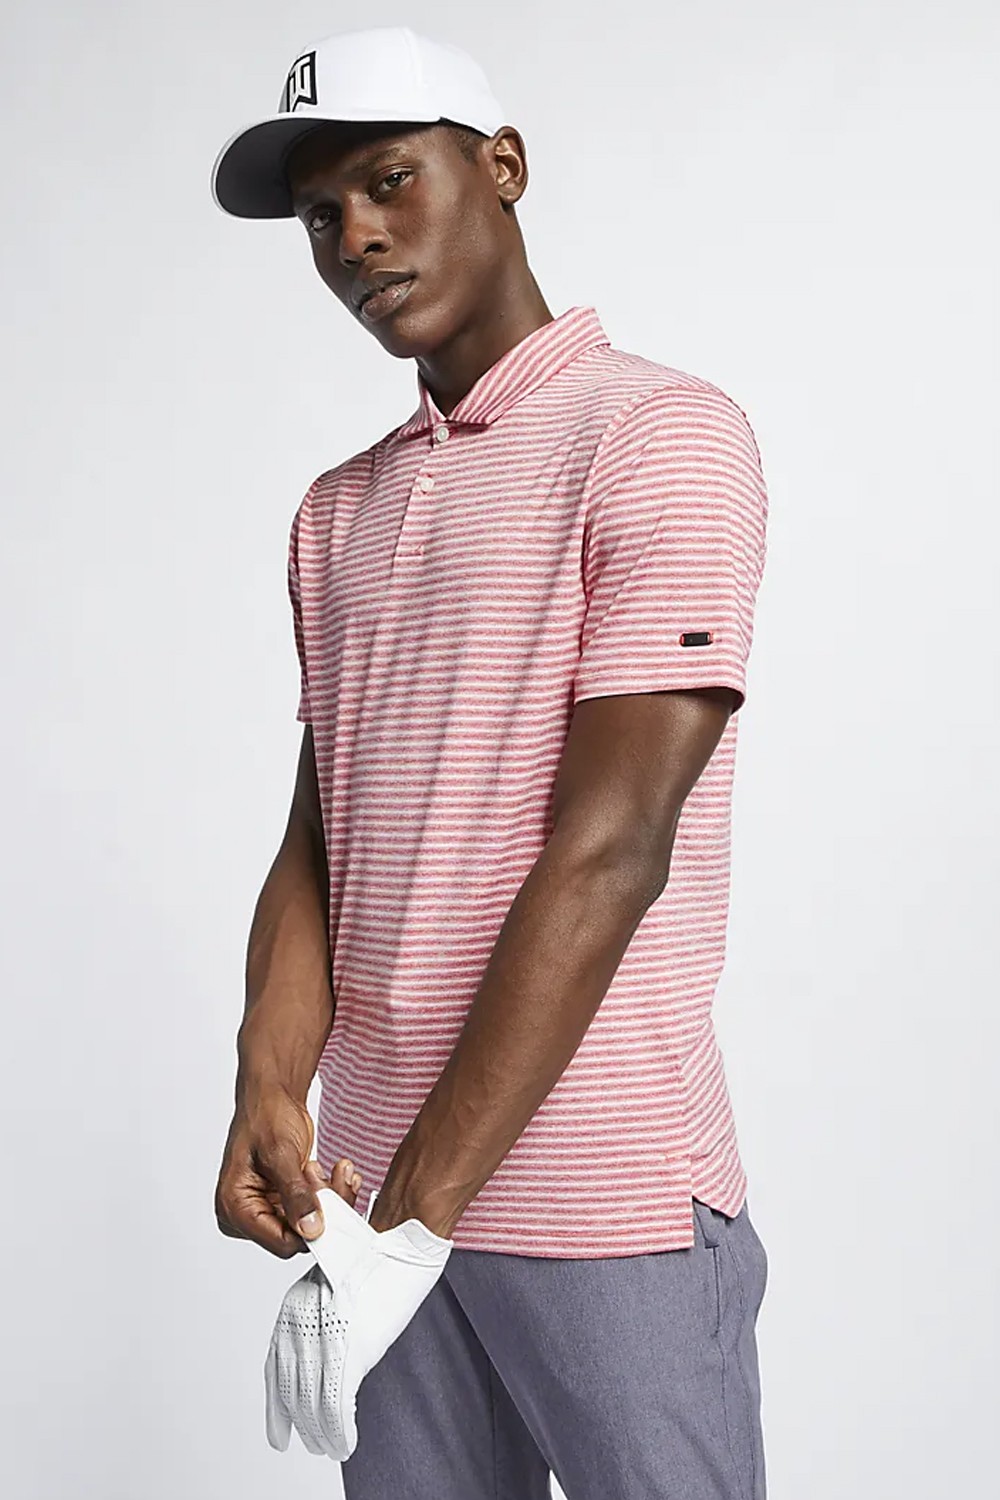 nike tiger woods collection 2019